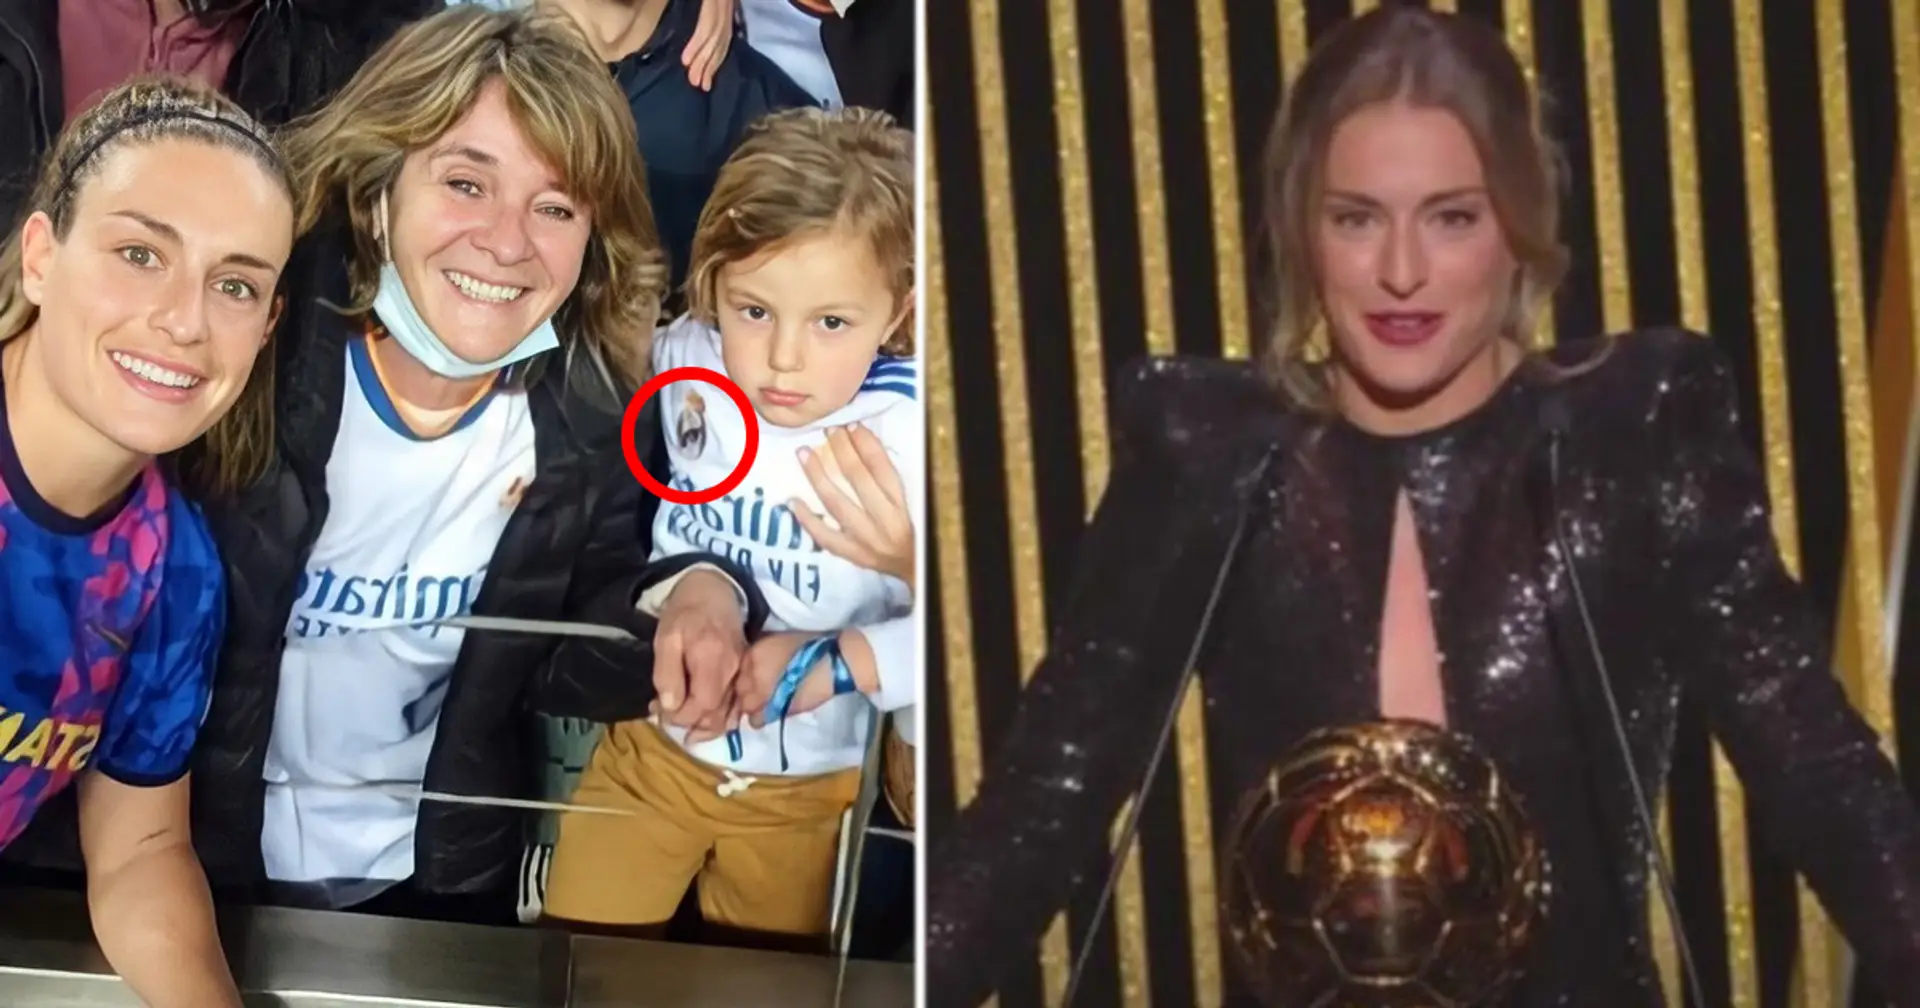 Barca's Ballon d'Or holder Alexia Putellas takes photo with Real Madrid player's family after Clasico